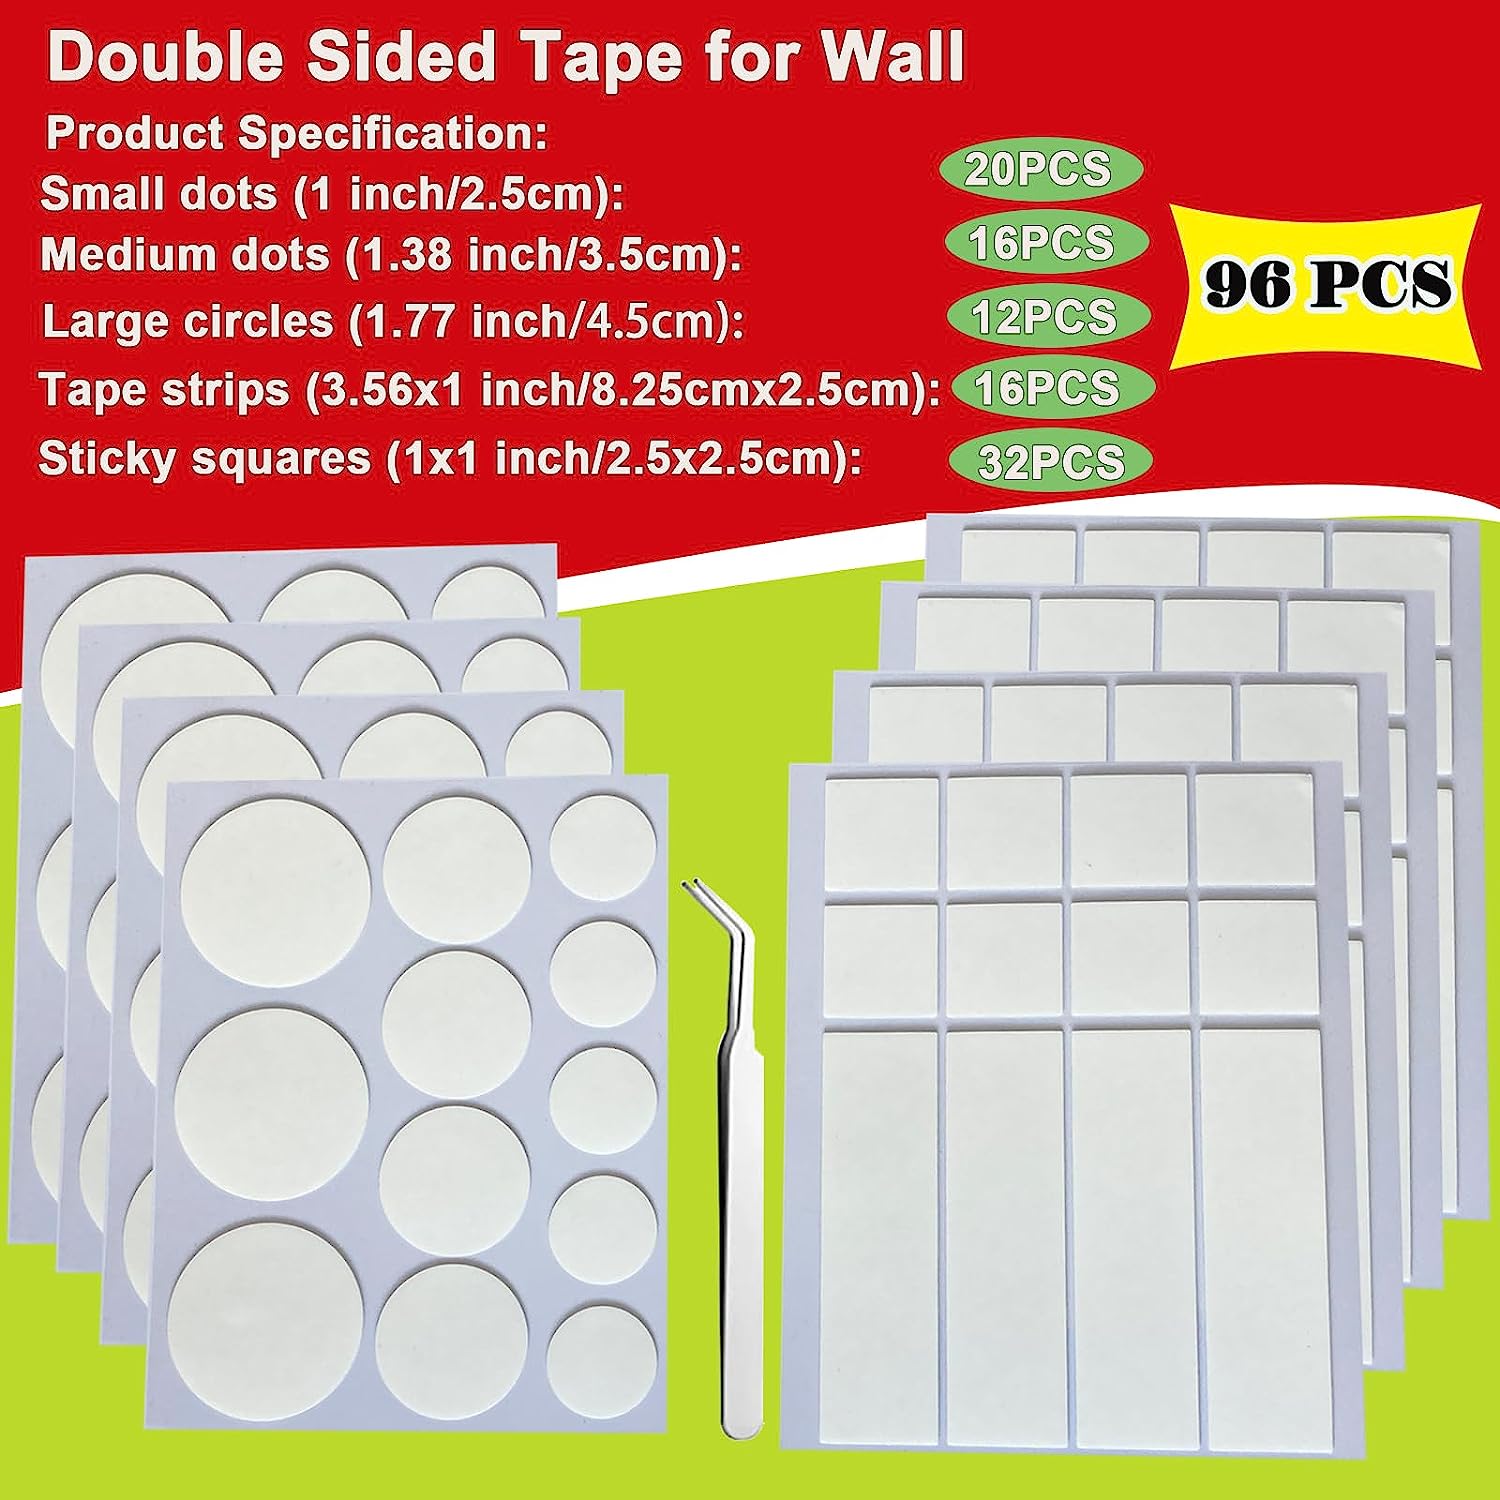 KAIHENG 96PCS Mounting Tape, Double Sided Tape for [...]